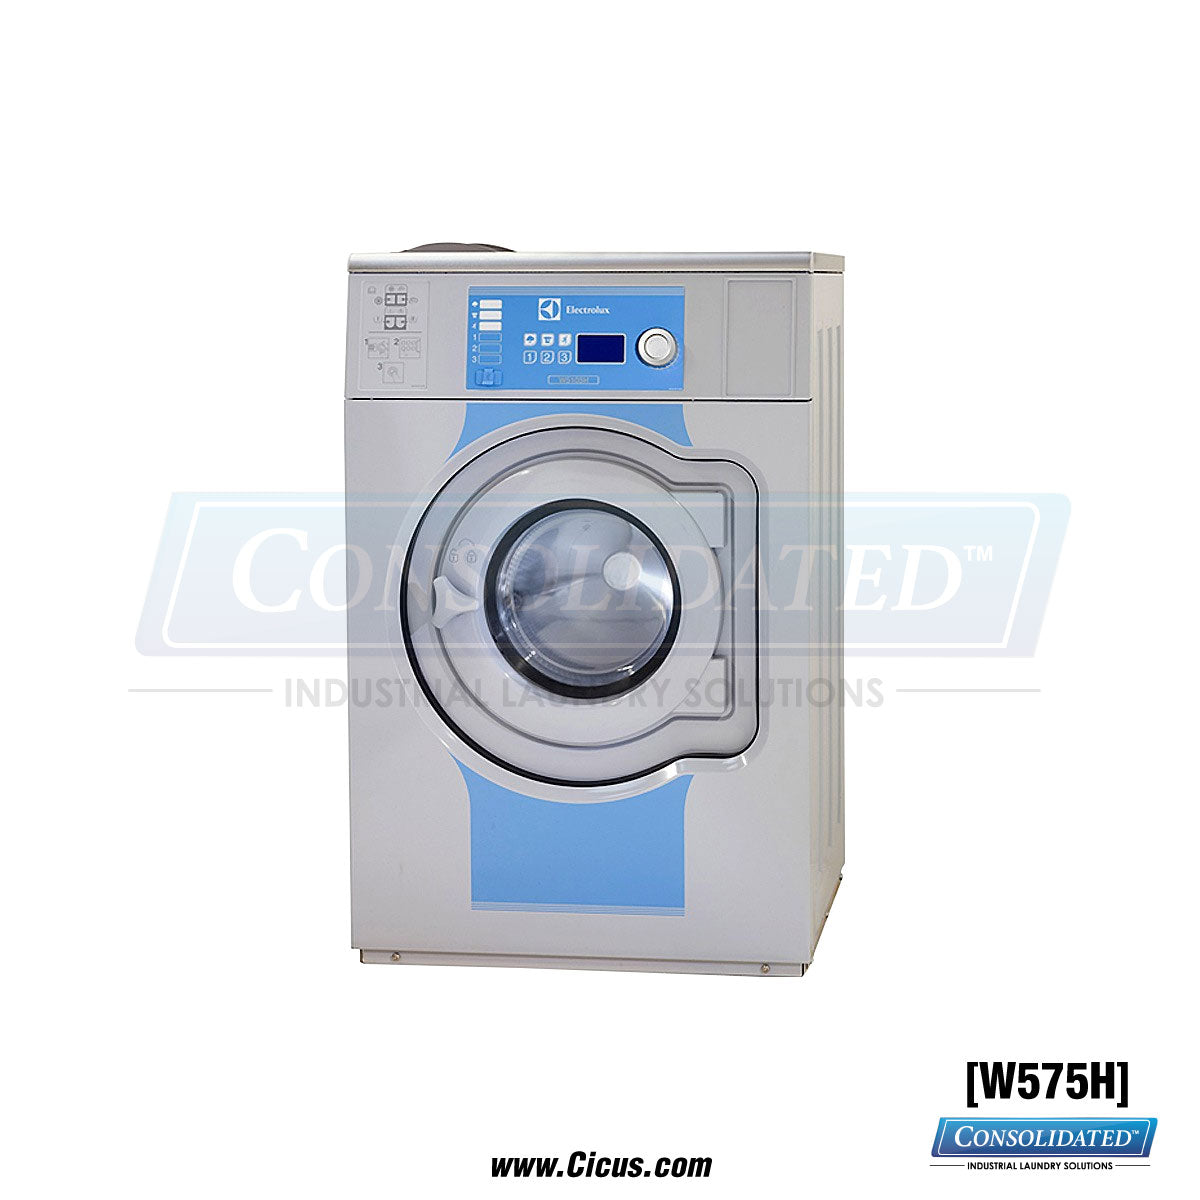 Electrolux G-Force Soft-Mount 25 LB Washer [W575H]